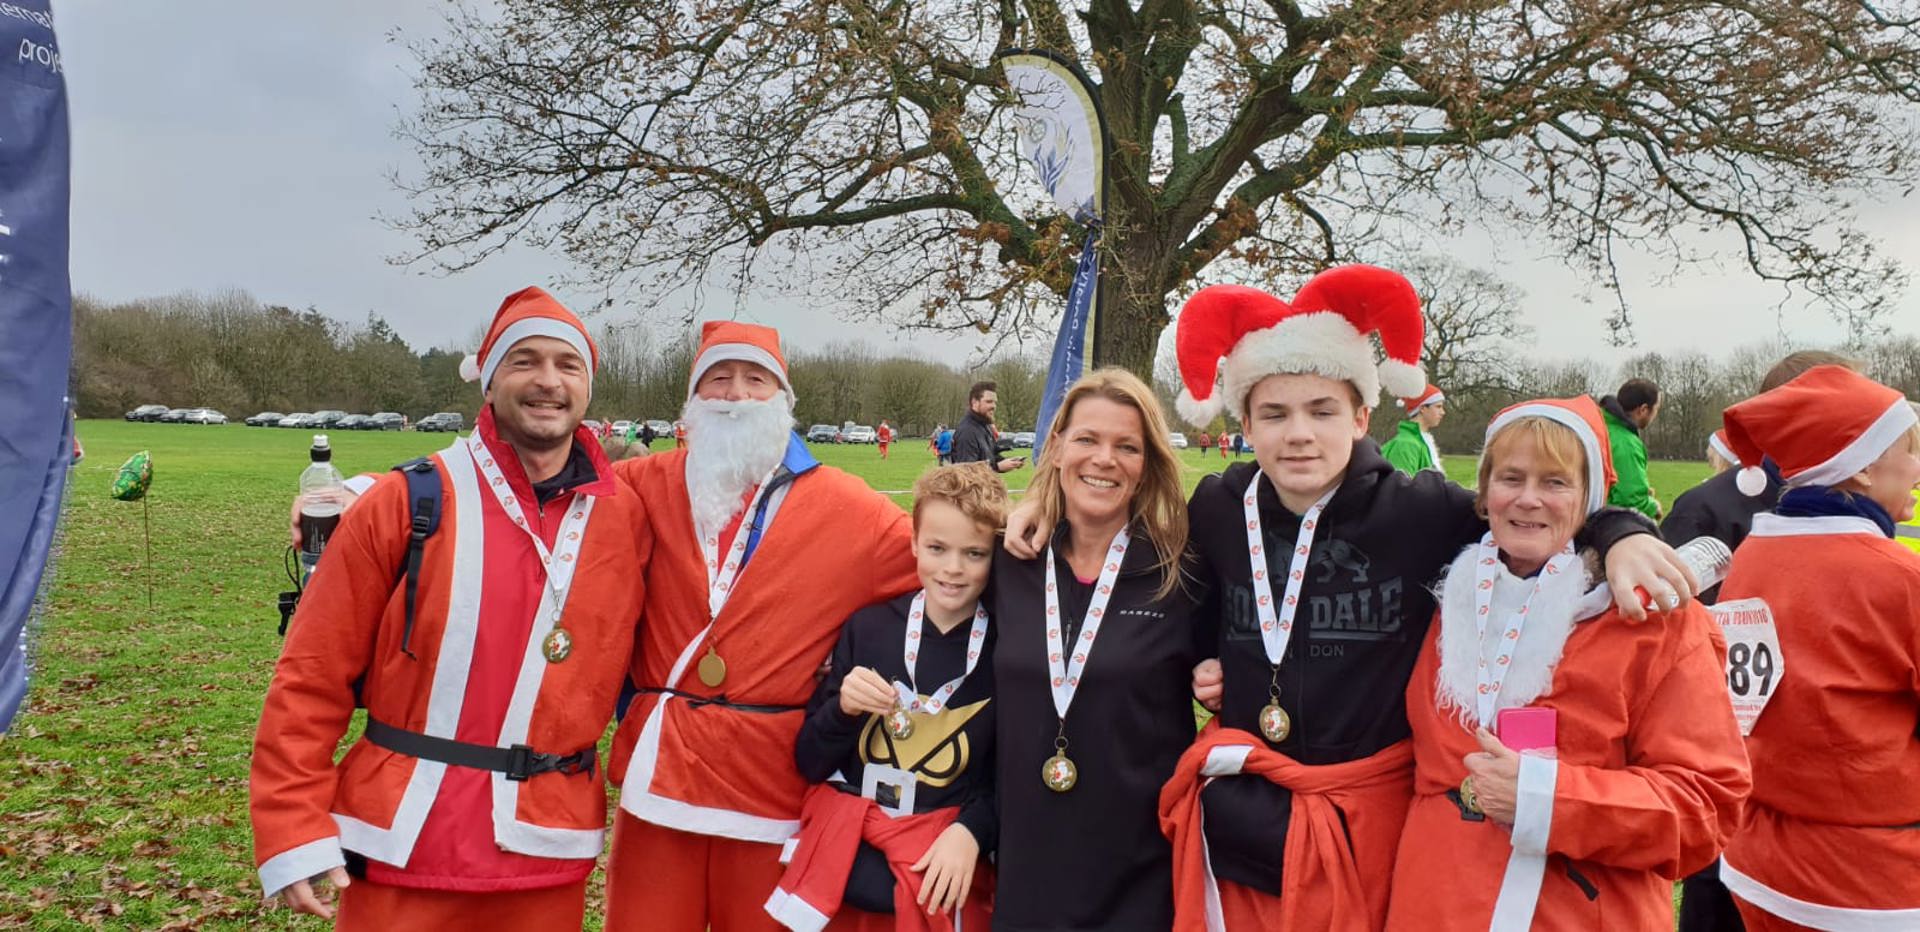 Ben Sibley and family taking part in the Santa Run event